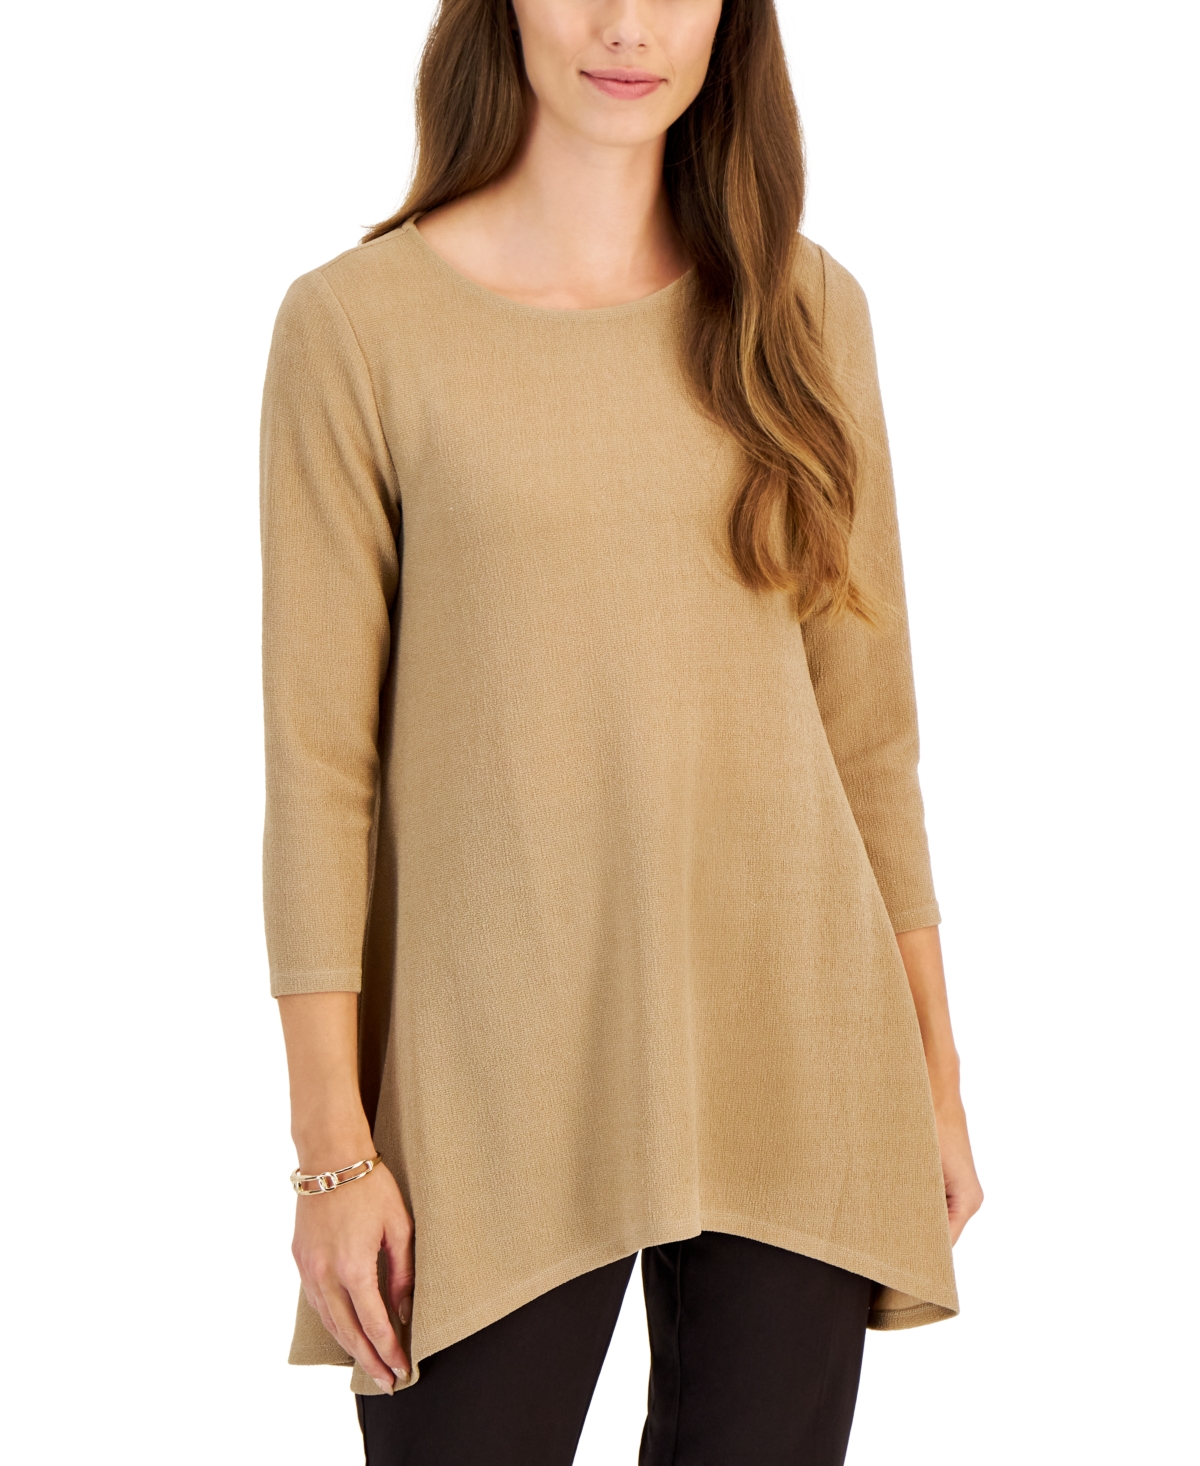 Women's New Shine Solid 3/4 Sleeve Knit Top, Created for Macy's - New Fawn